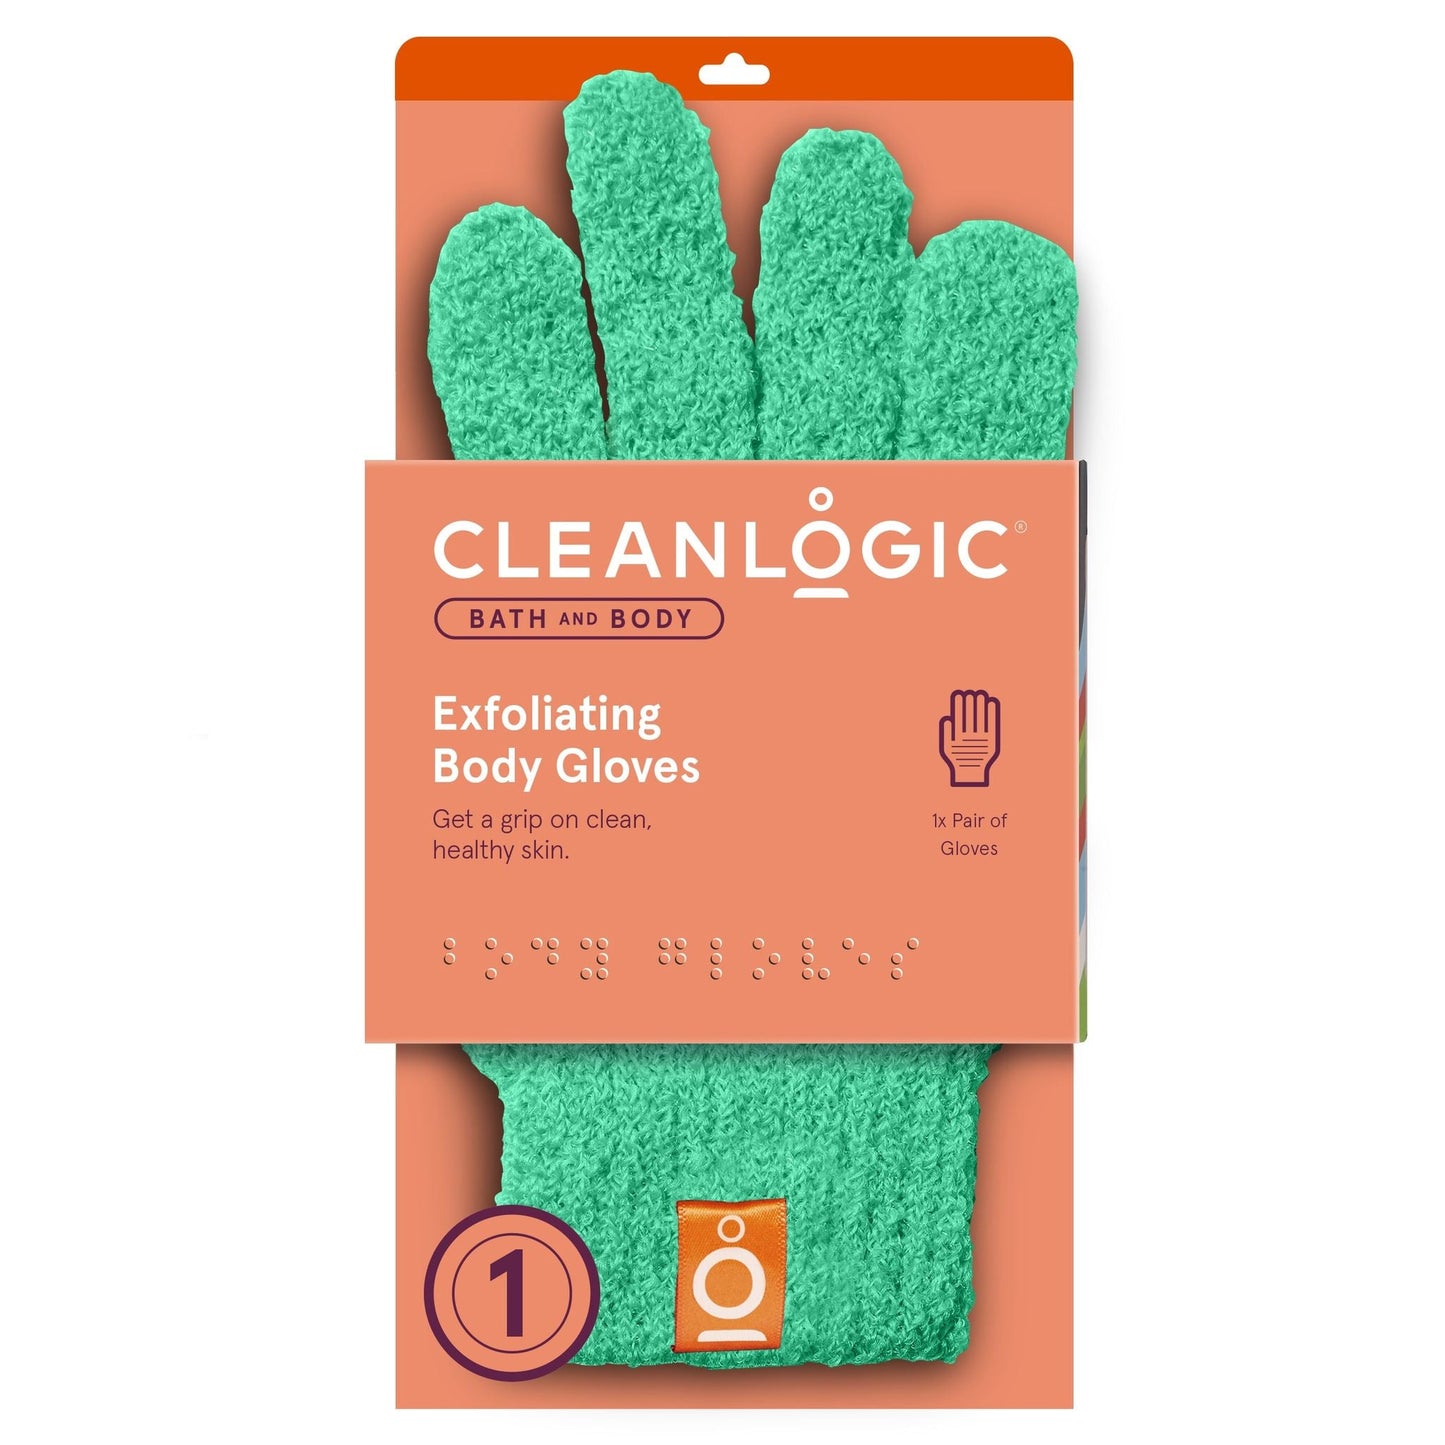 Green Body Exfoliating Gloves in orange packaging by CleanLogic with braille written on the package